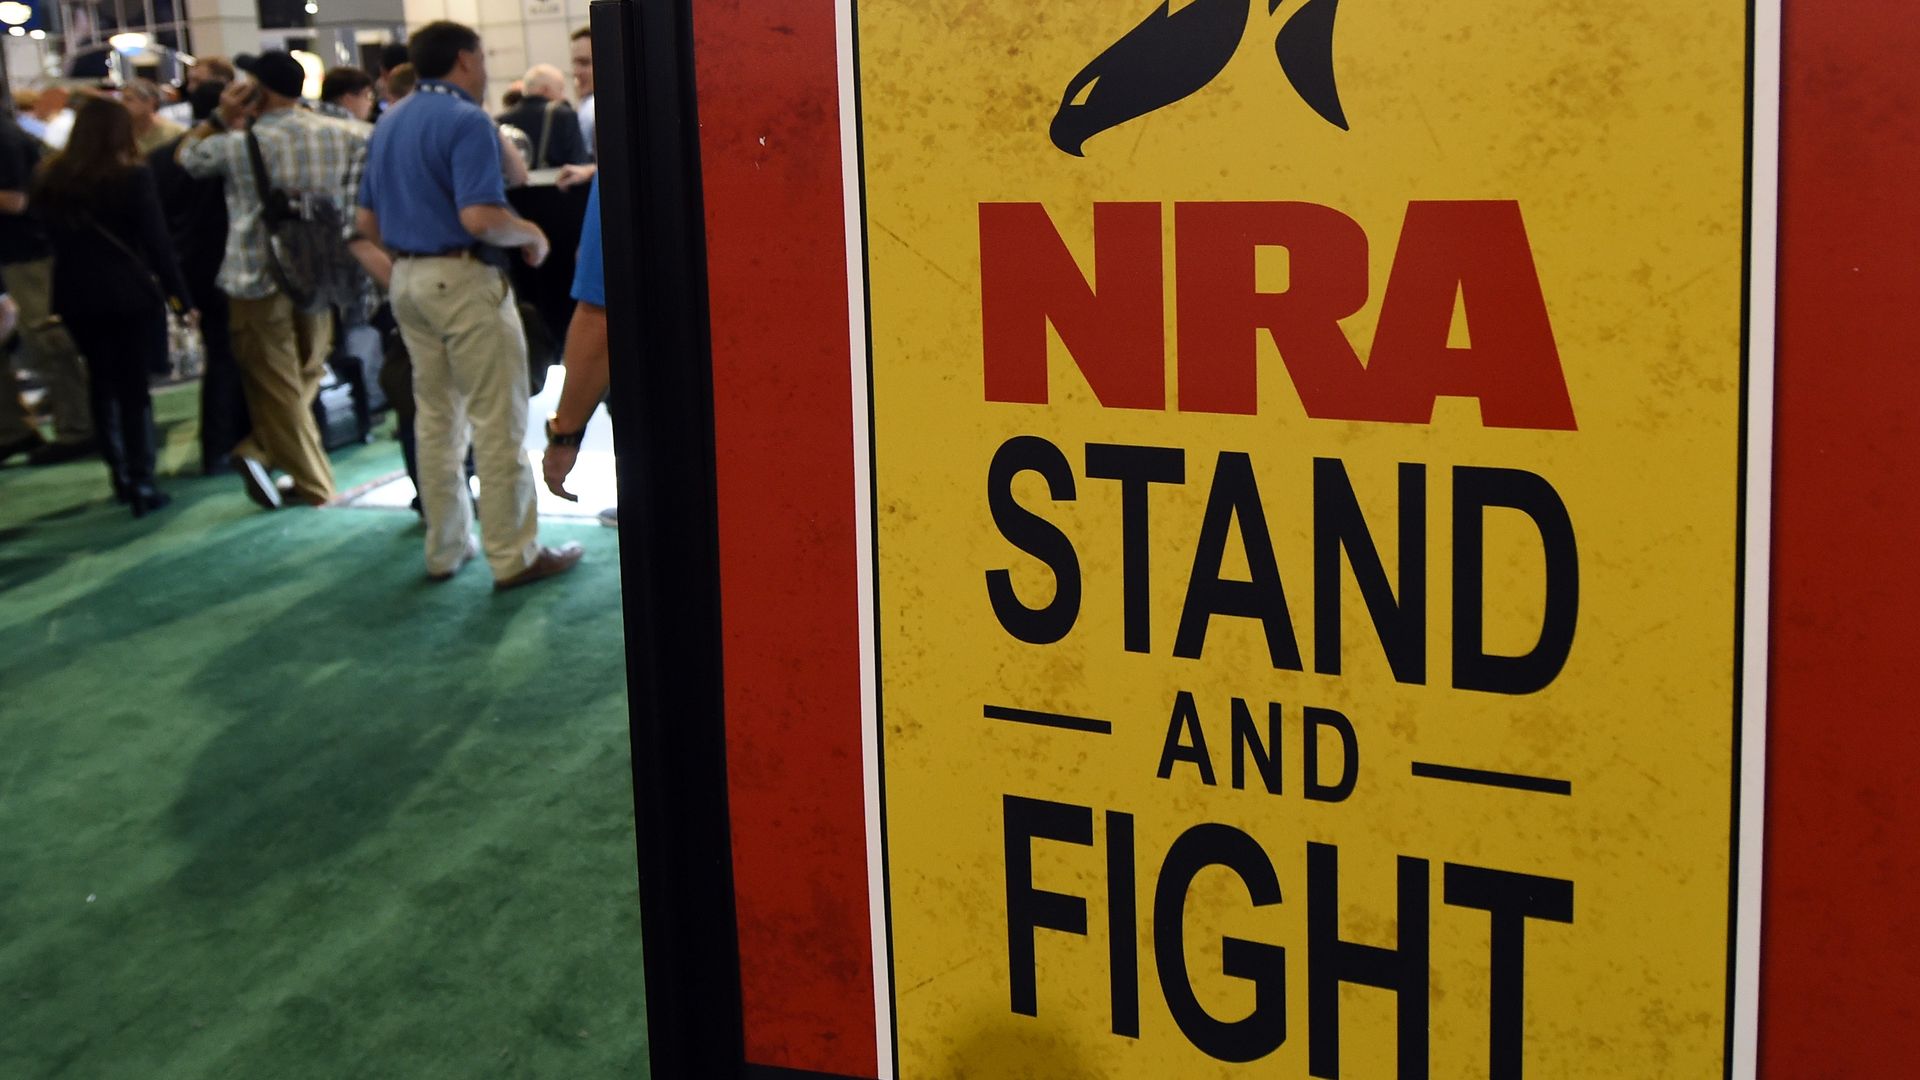  Convention attendees pass by a sign for the National Rifle Association at the 2016 National Shooting Sports Foundation's event